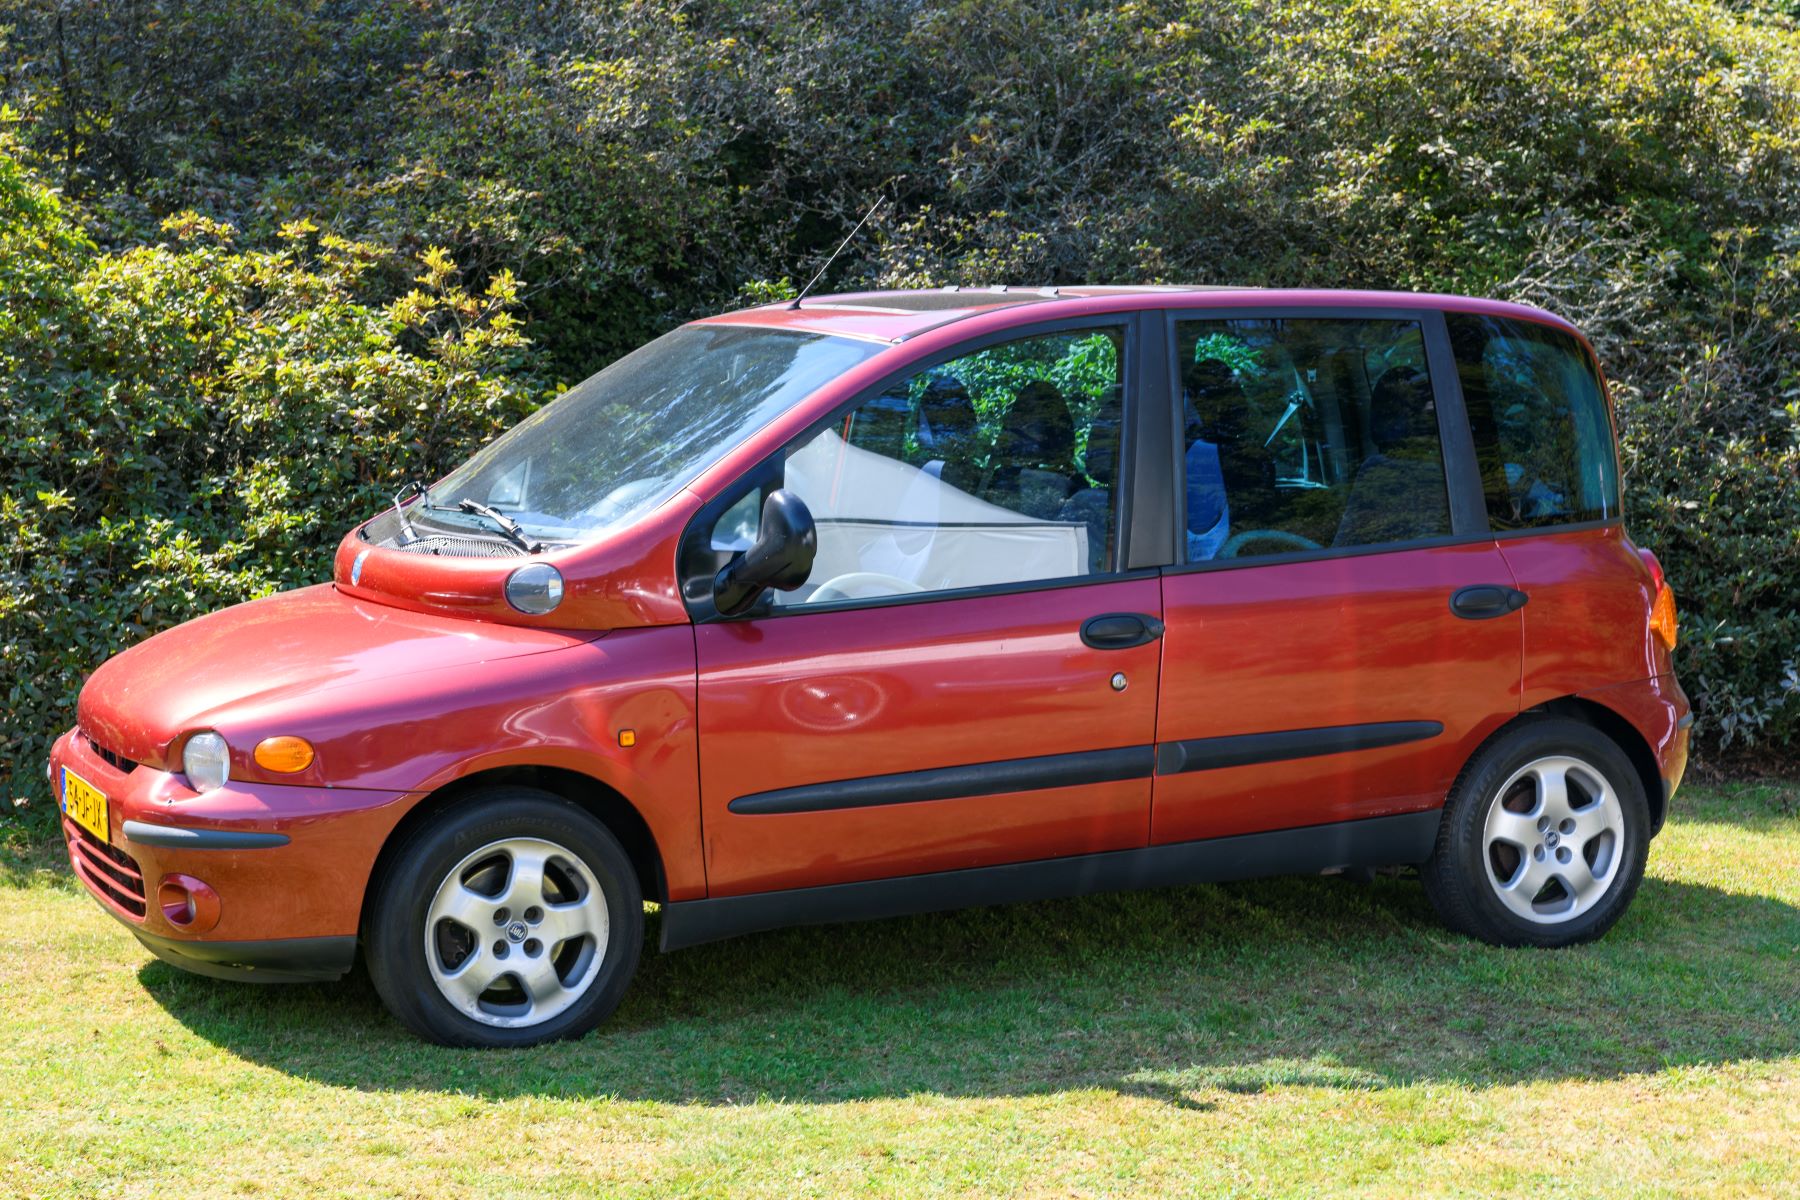 The Fiat Multipla MPV at the 2019 Concours d'Elegance at the palace Soestdijk in Baarn, Netherlands